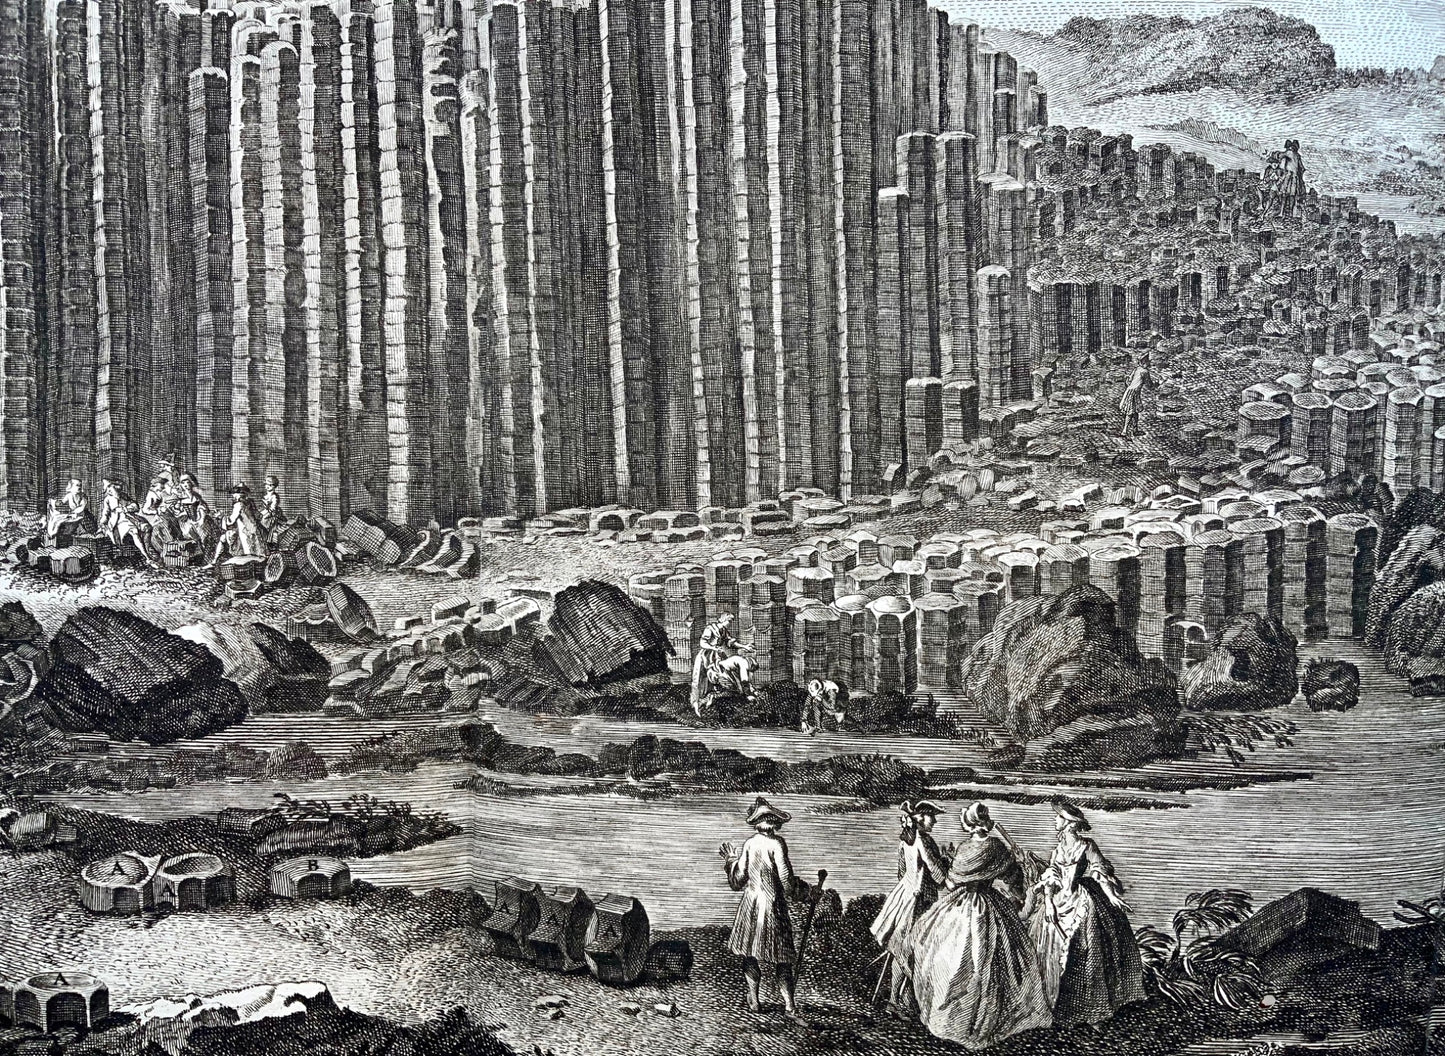 1757 Giant's Causeway, Antrim, Ireland, large panorama, 68.5 cm, foreign topography